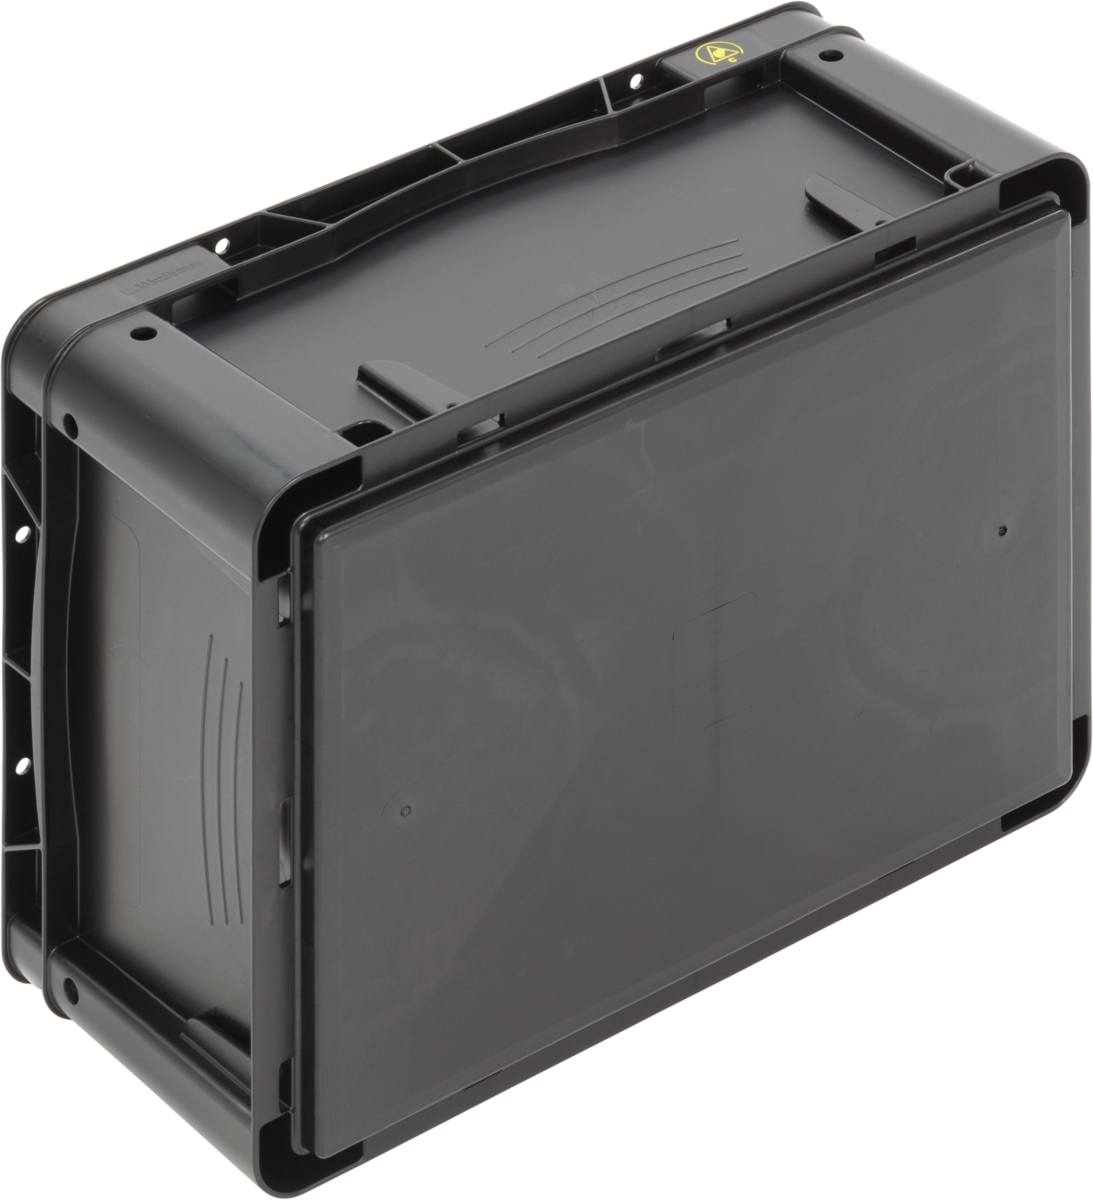 ESD-Safe-FUTURA-Norm-Stacking-Bin-Containers-Flat-Base-007-Ref.-4317.060.992_1004391_400x300x175_02